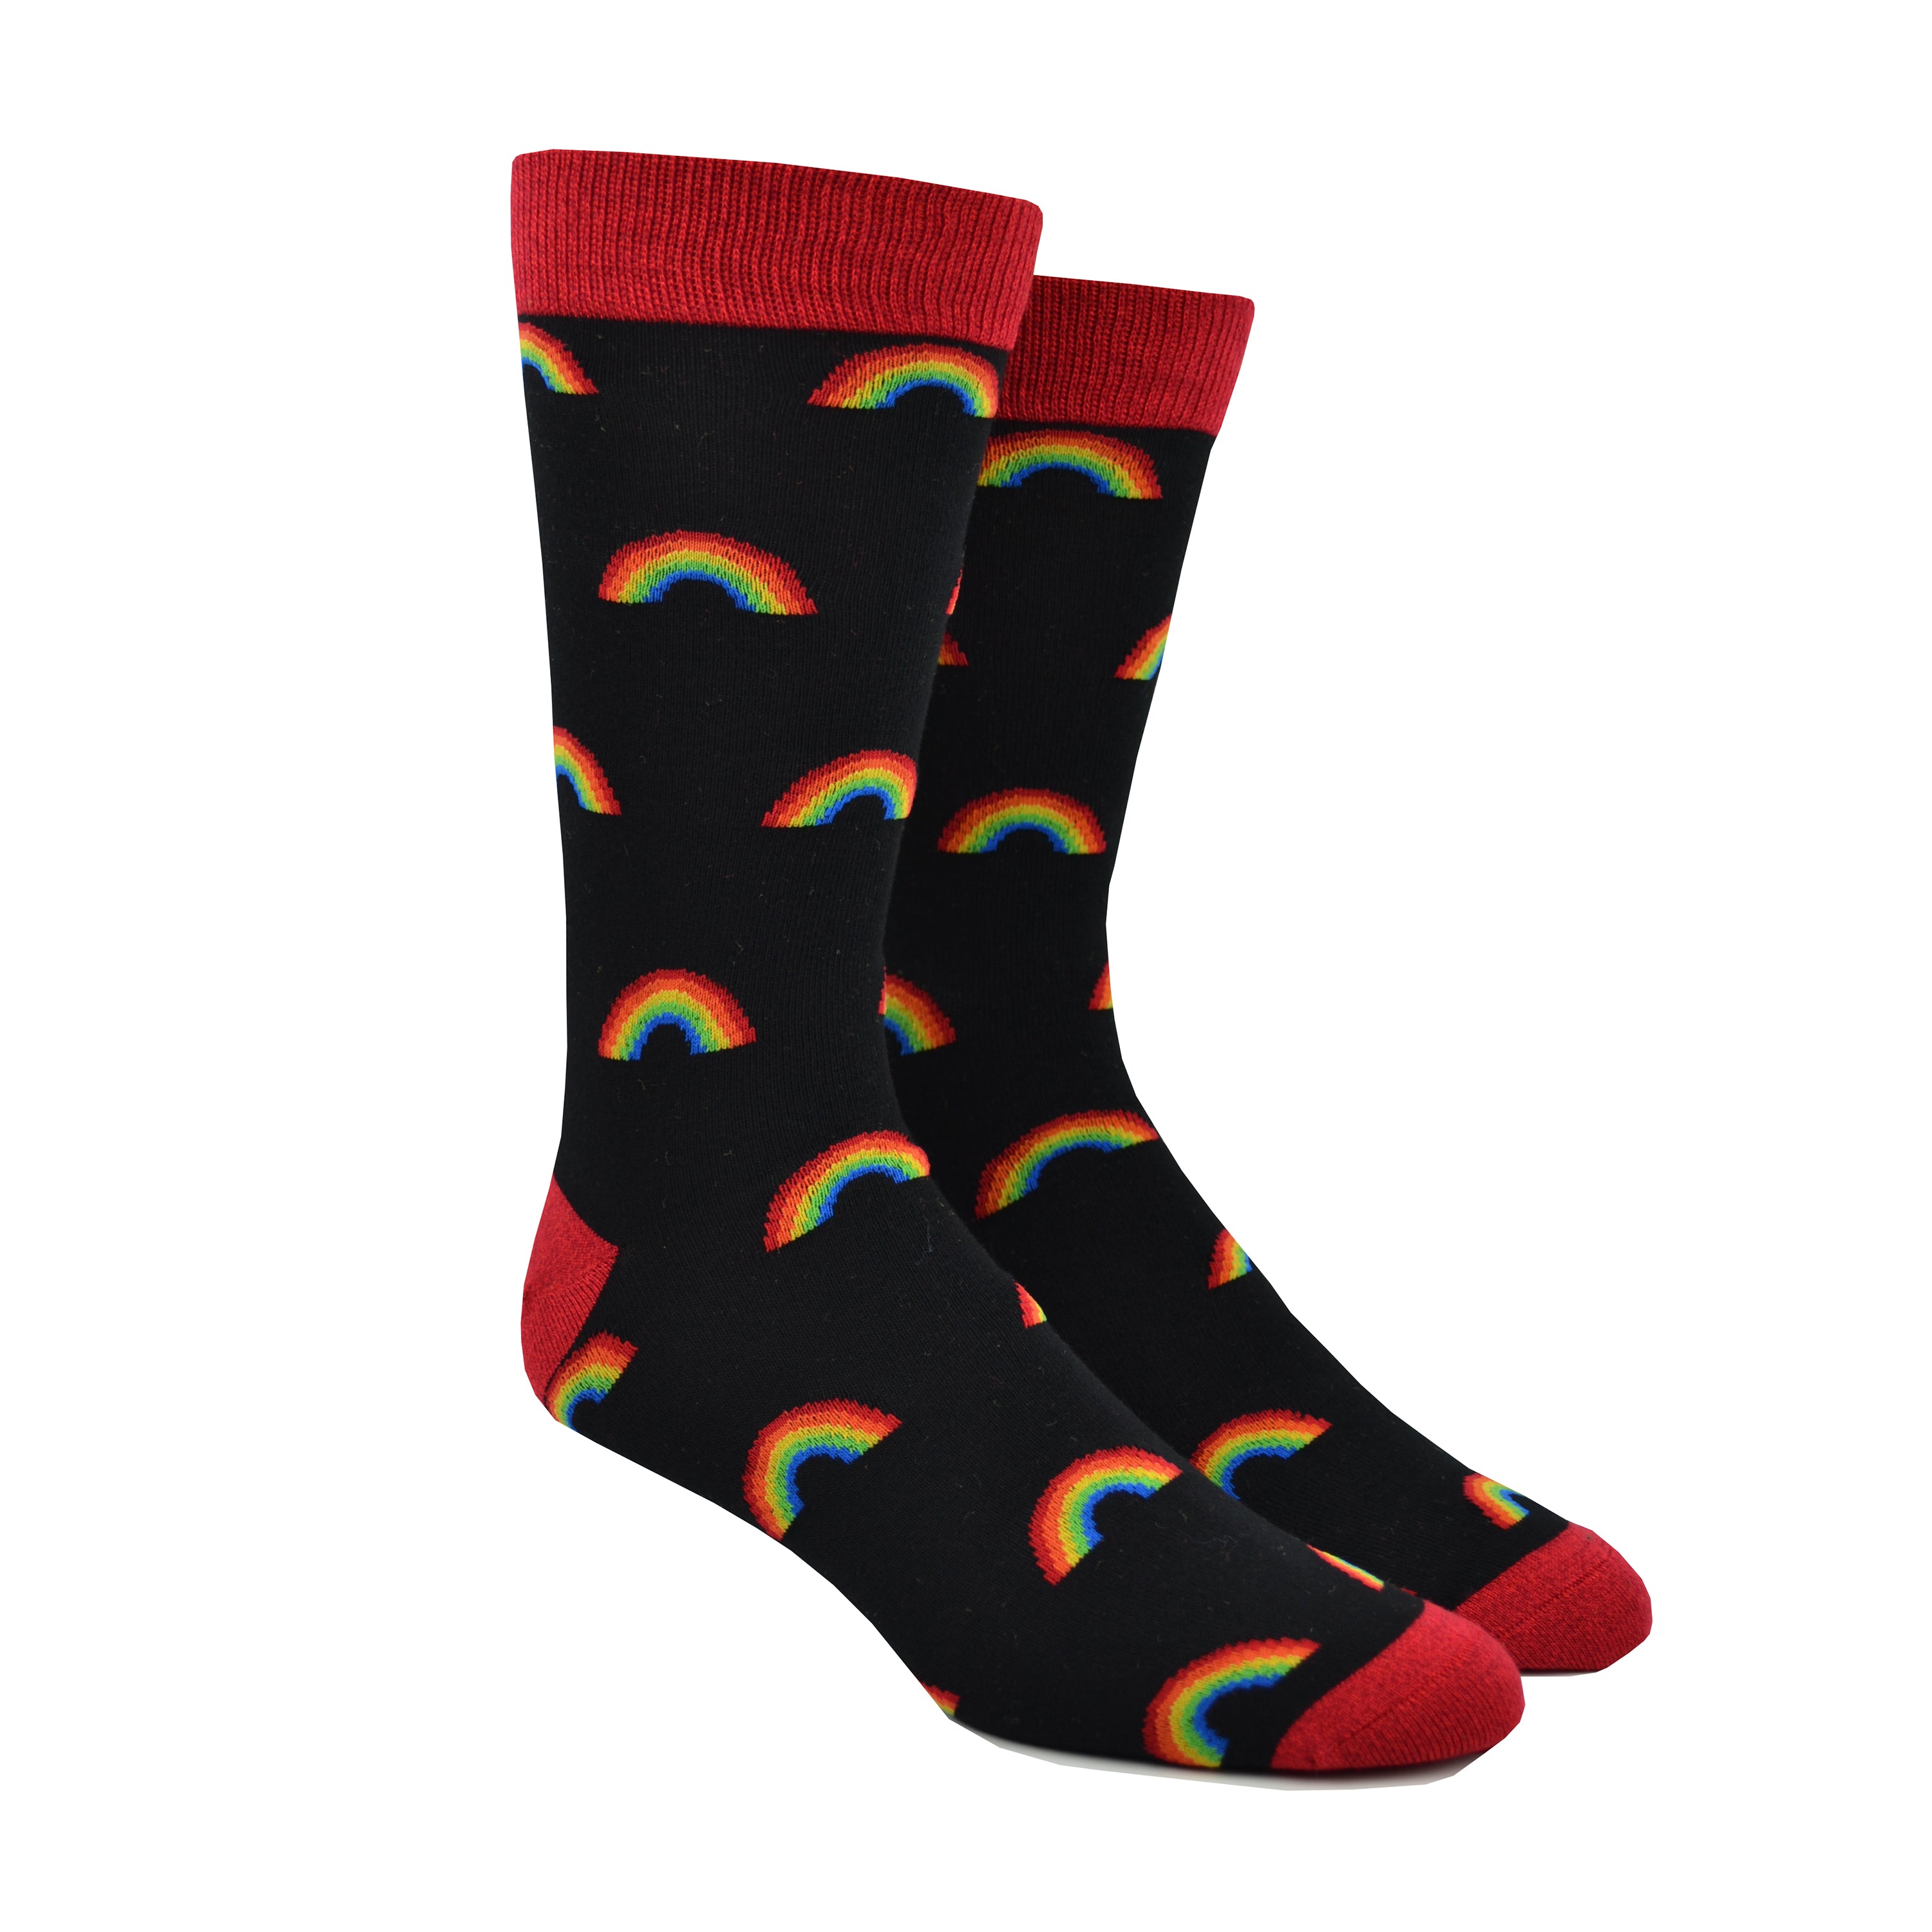 Shown on a foot form, a pair of Socksmith's bamboo men's crew socks in black with red cuff/heel and small rainbow print